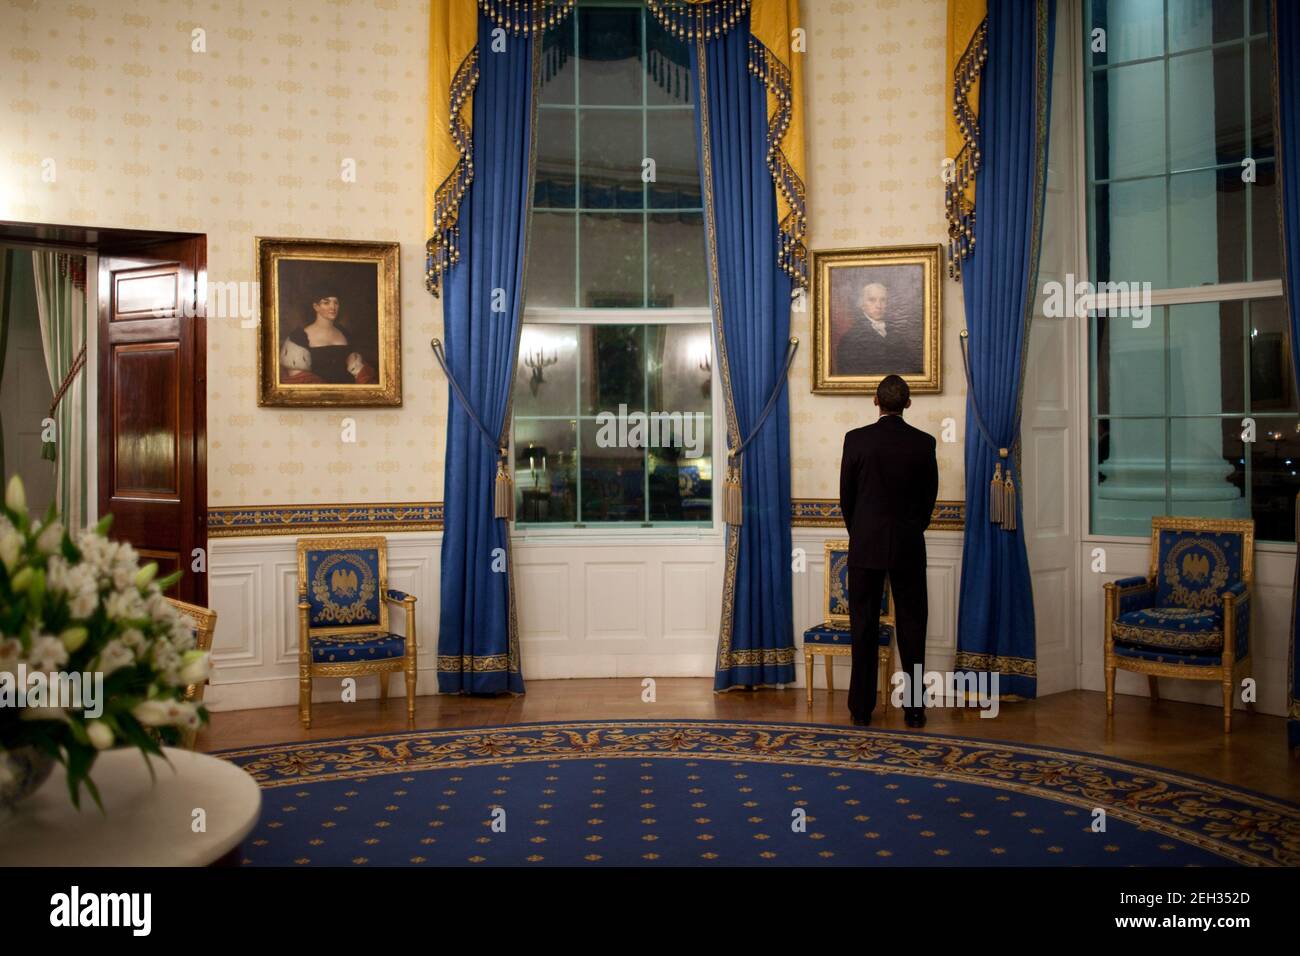 President Barack Obama looks at a portrait of President John Adams while waiting in the Blue Room prior to his press conference in the East Room 2/9/09. Official White House Photo by Pete Souza Stock Photo